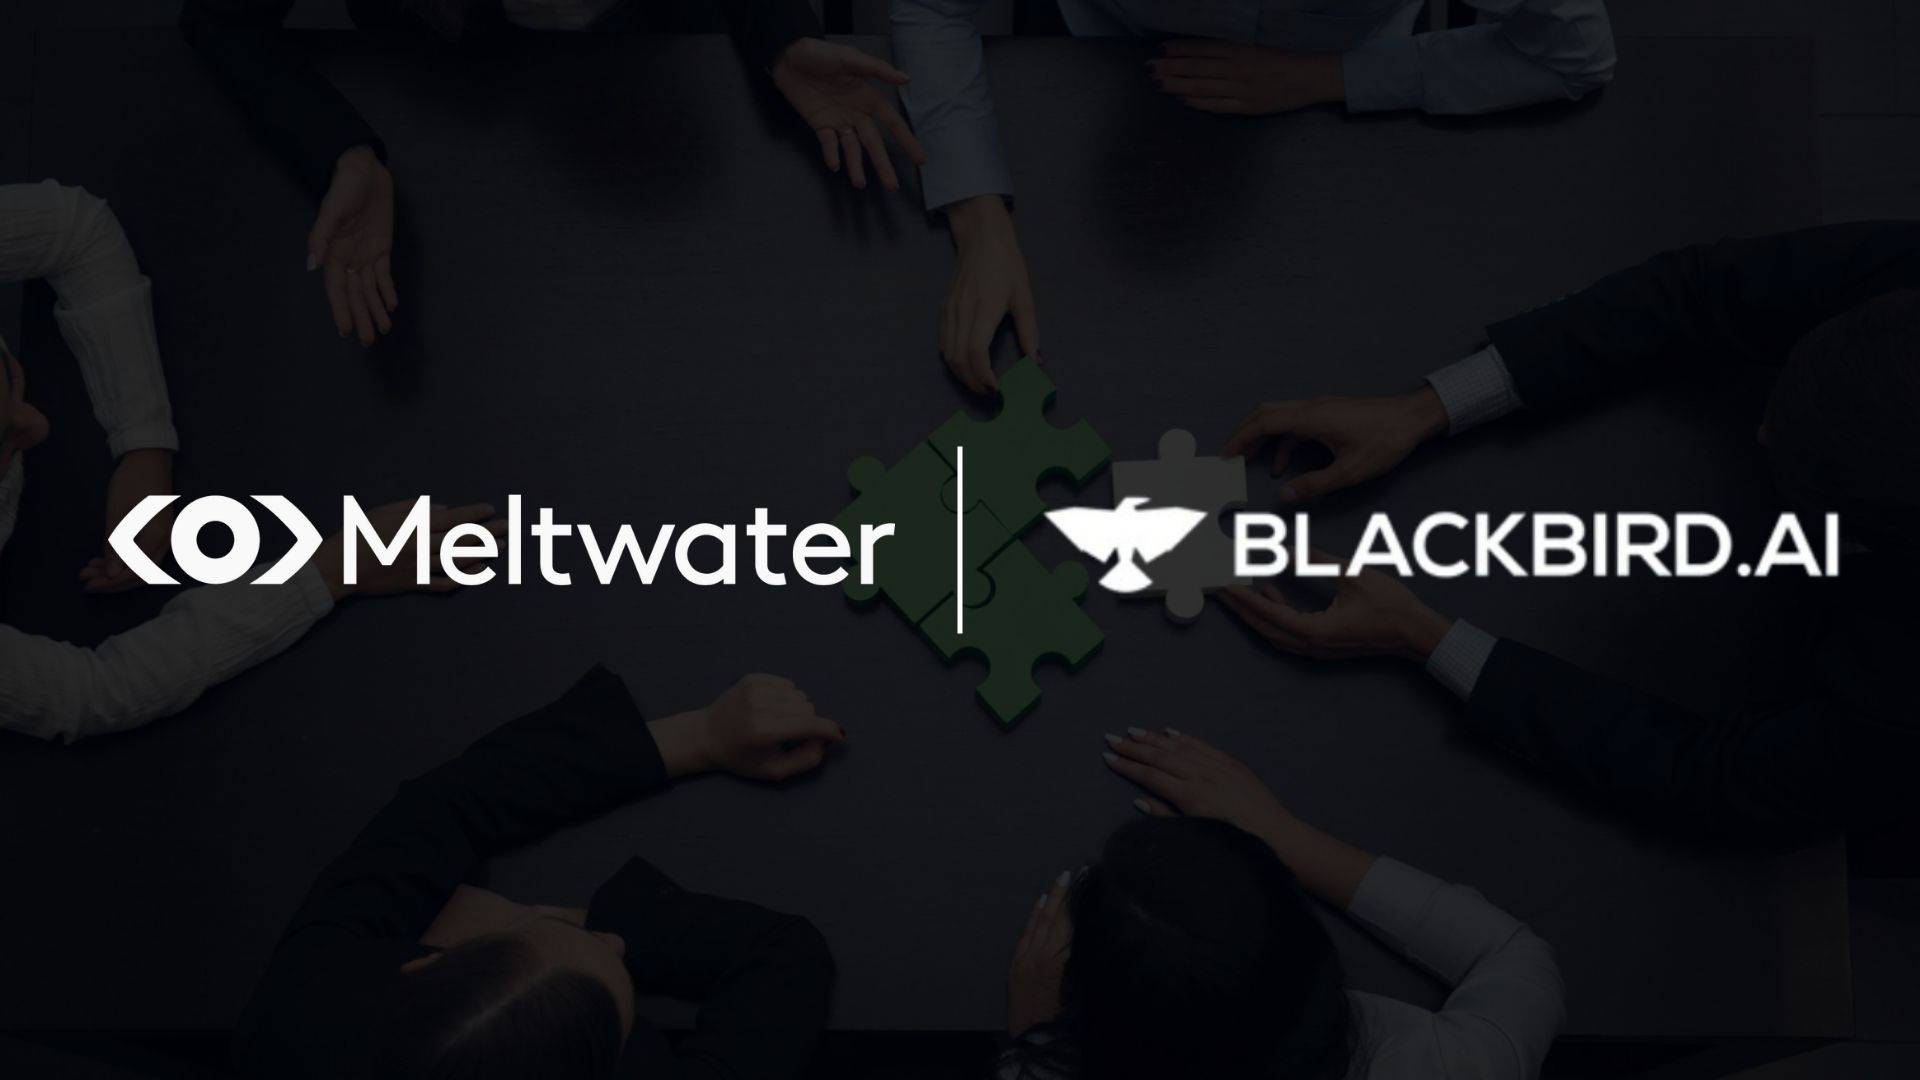 Meltwater and Blackbird.AI Partner to Combat Misinformation and Disinformation